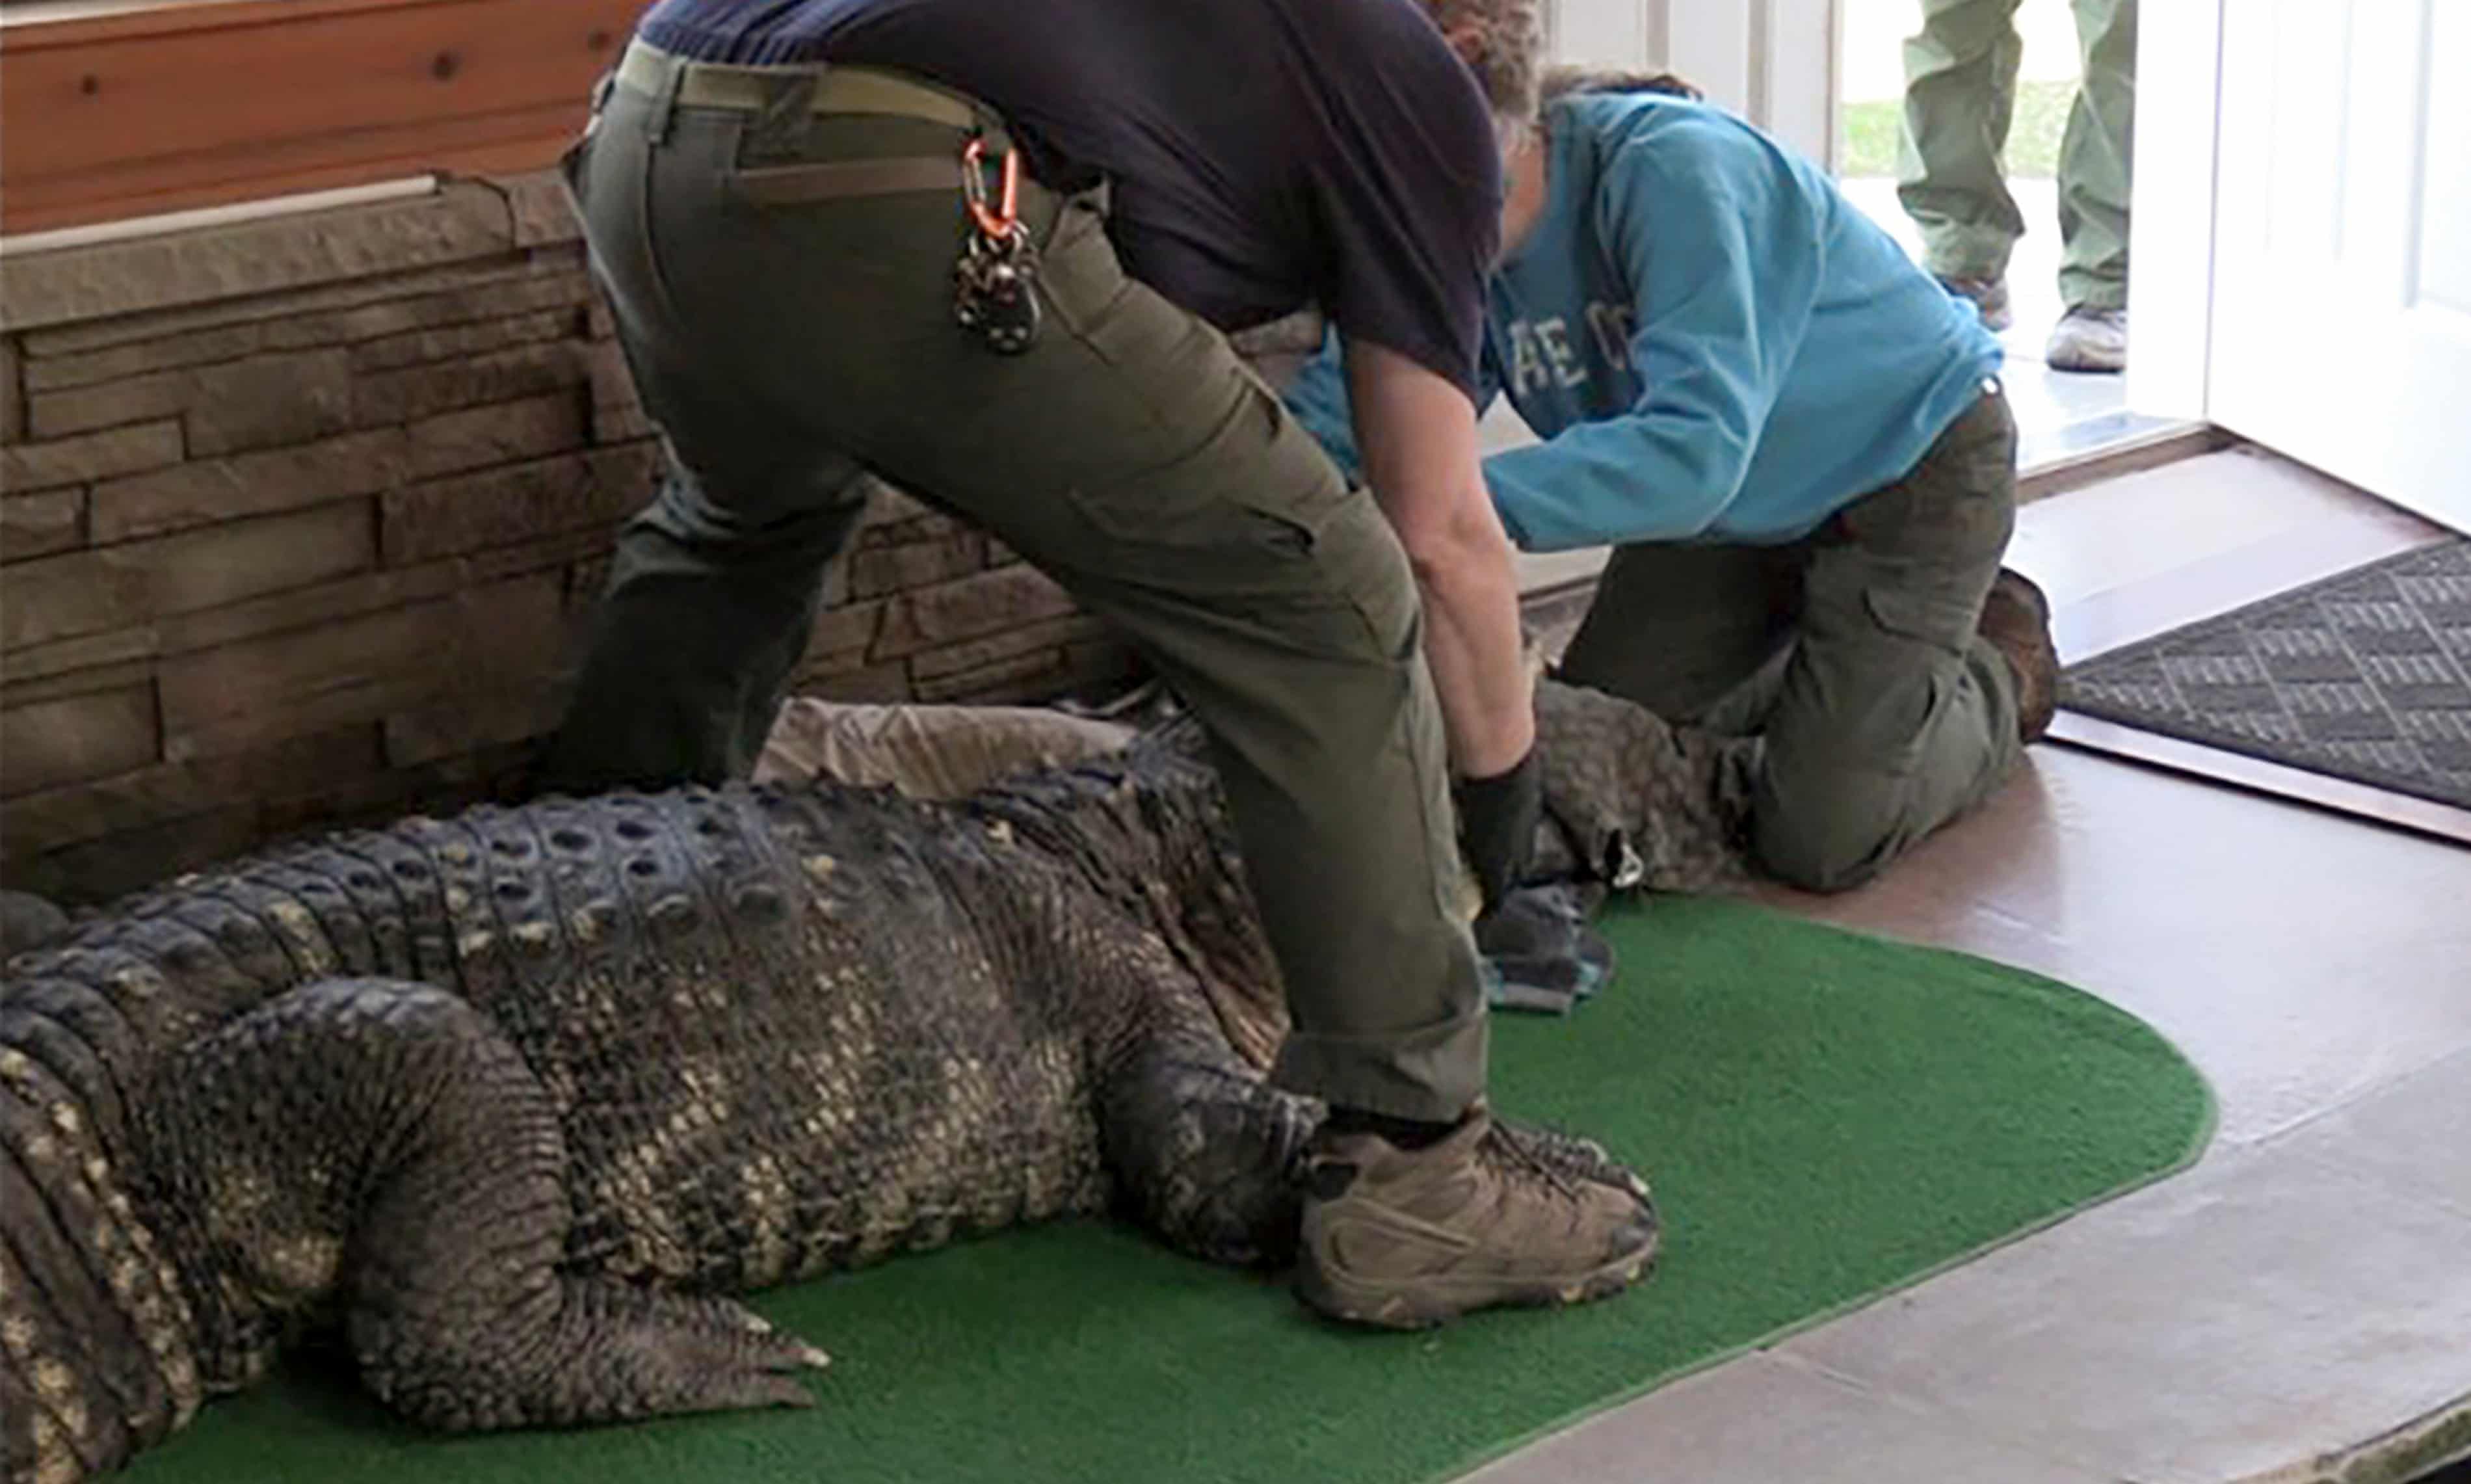 Officials seize 750lb blind alligator from New York home (theguardian.com)